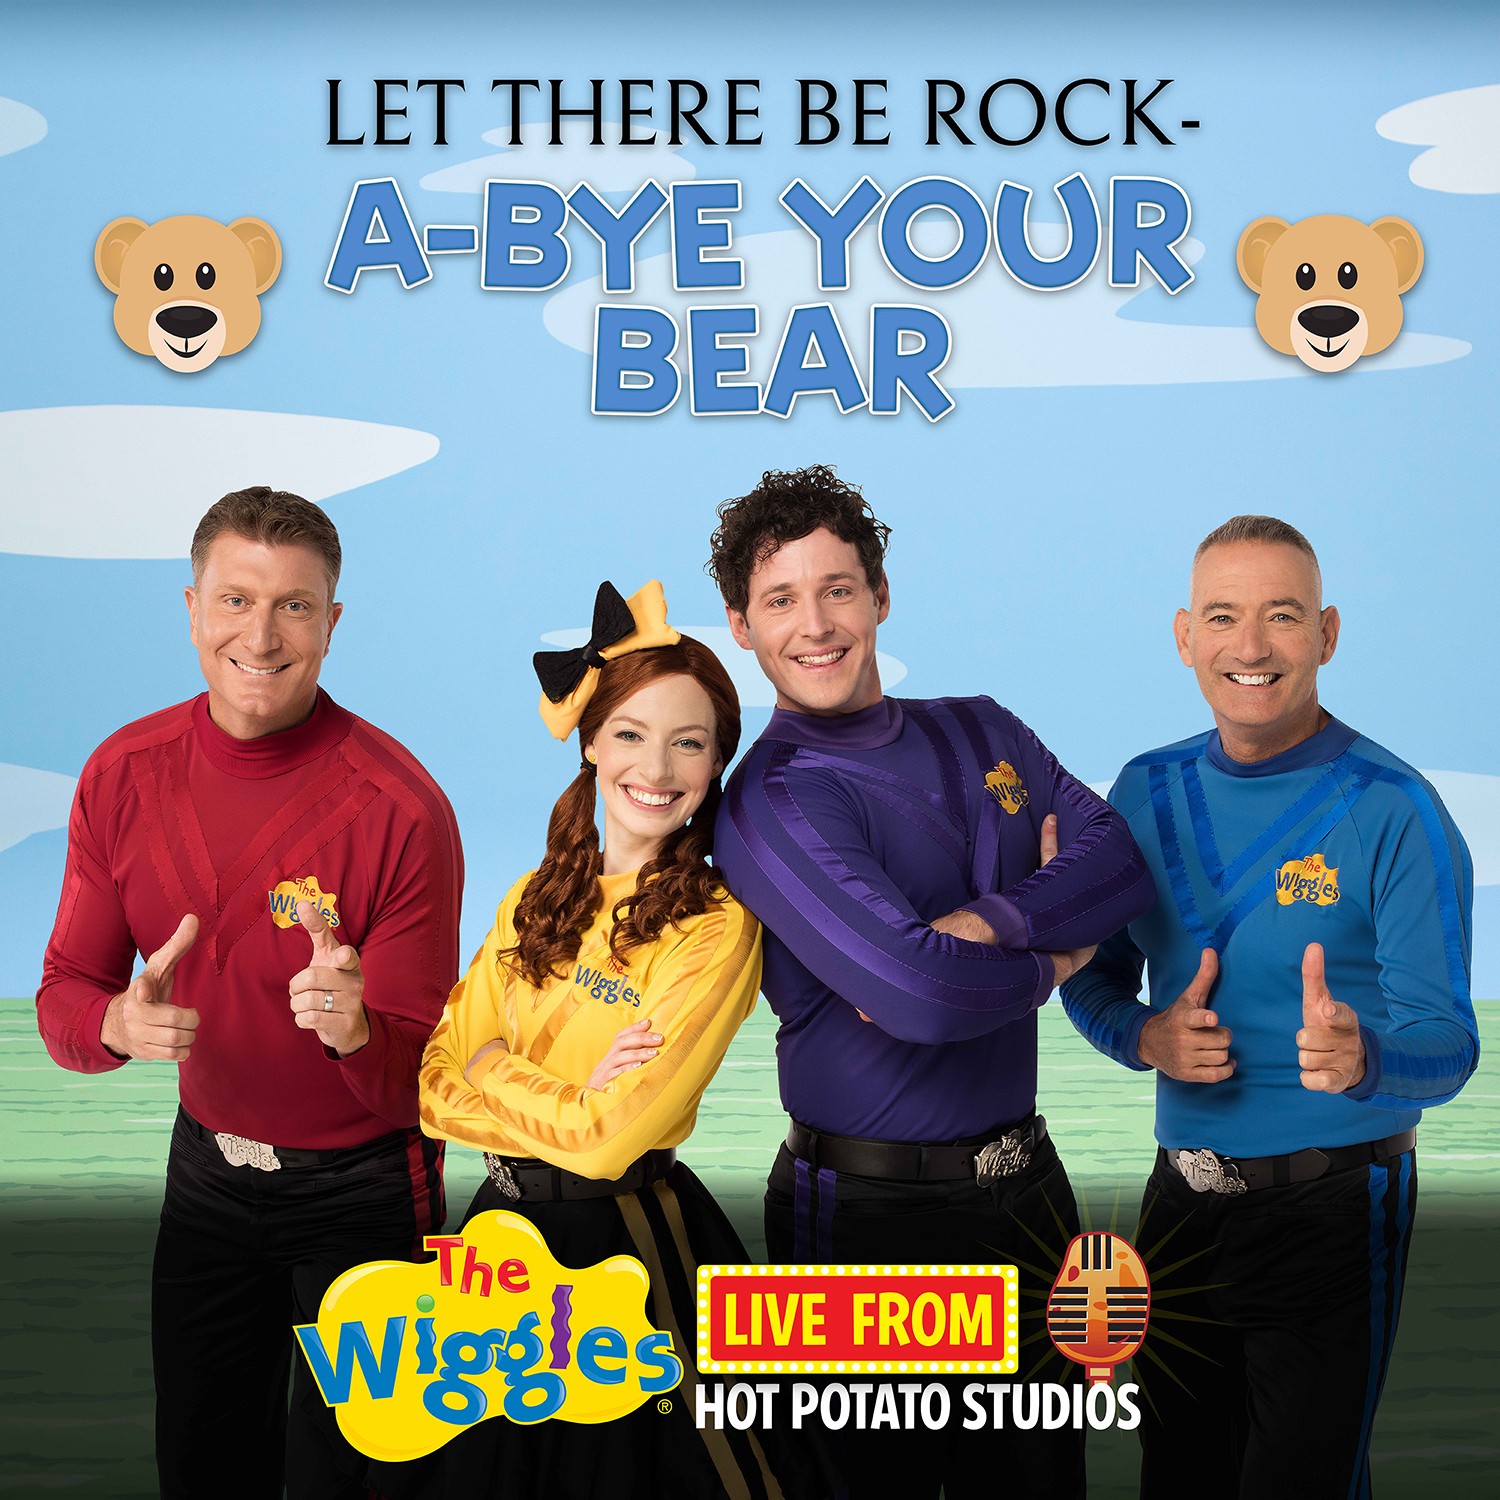 Let There Be Rock-a-Bye Your Bear (album), Wigglepedia